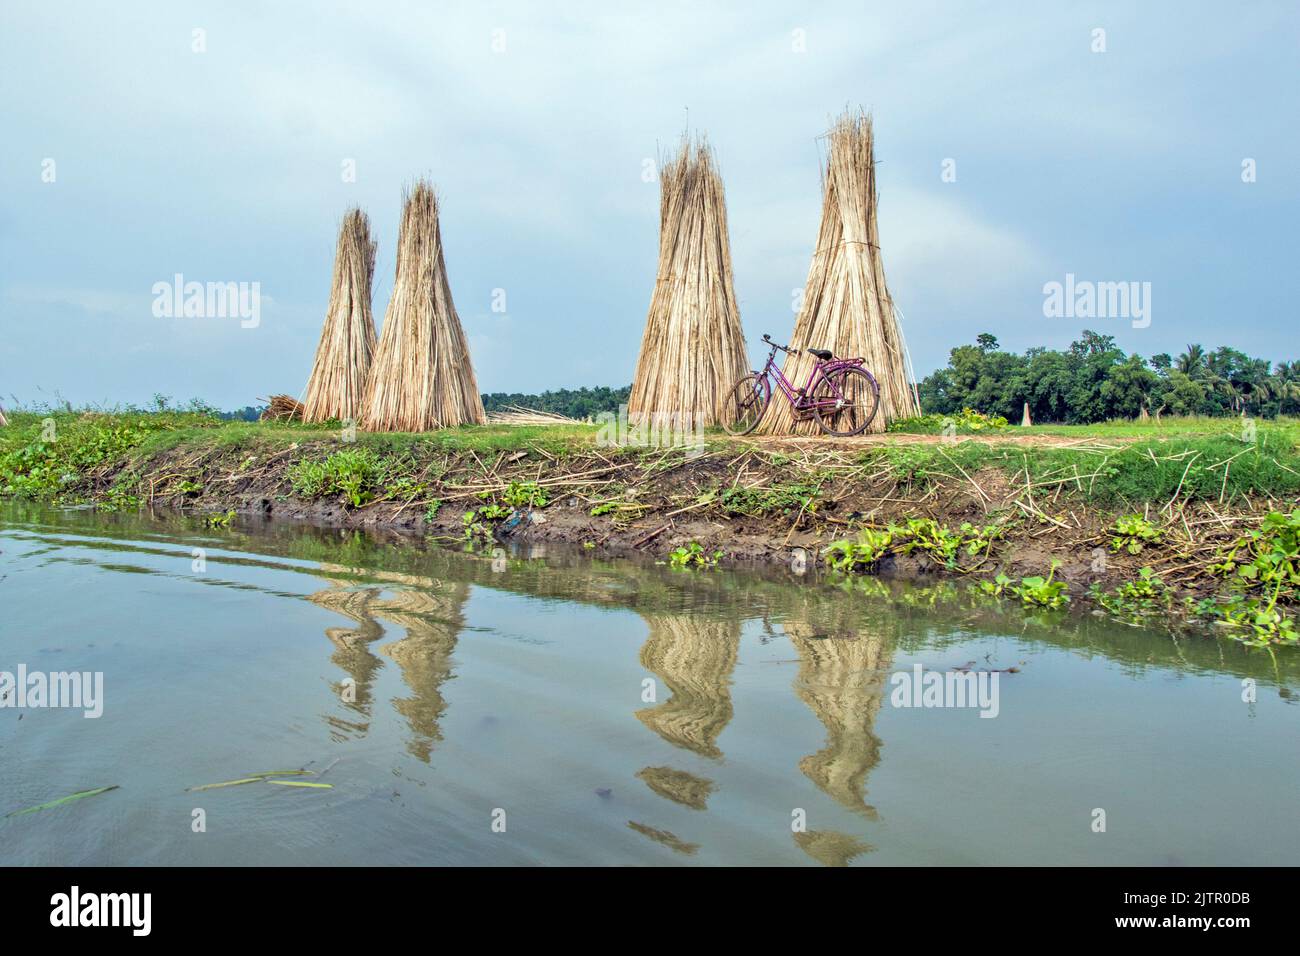 Jute sticks are being gathered in one place and dried. The reflection of the dried stick fell into the water of the pond. Stock Photo